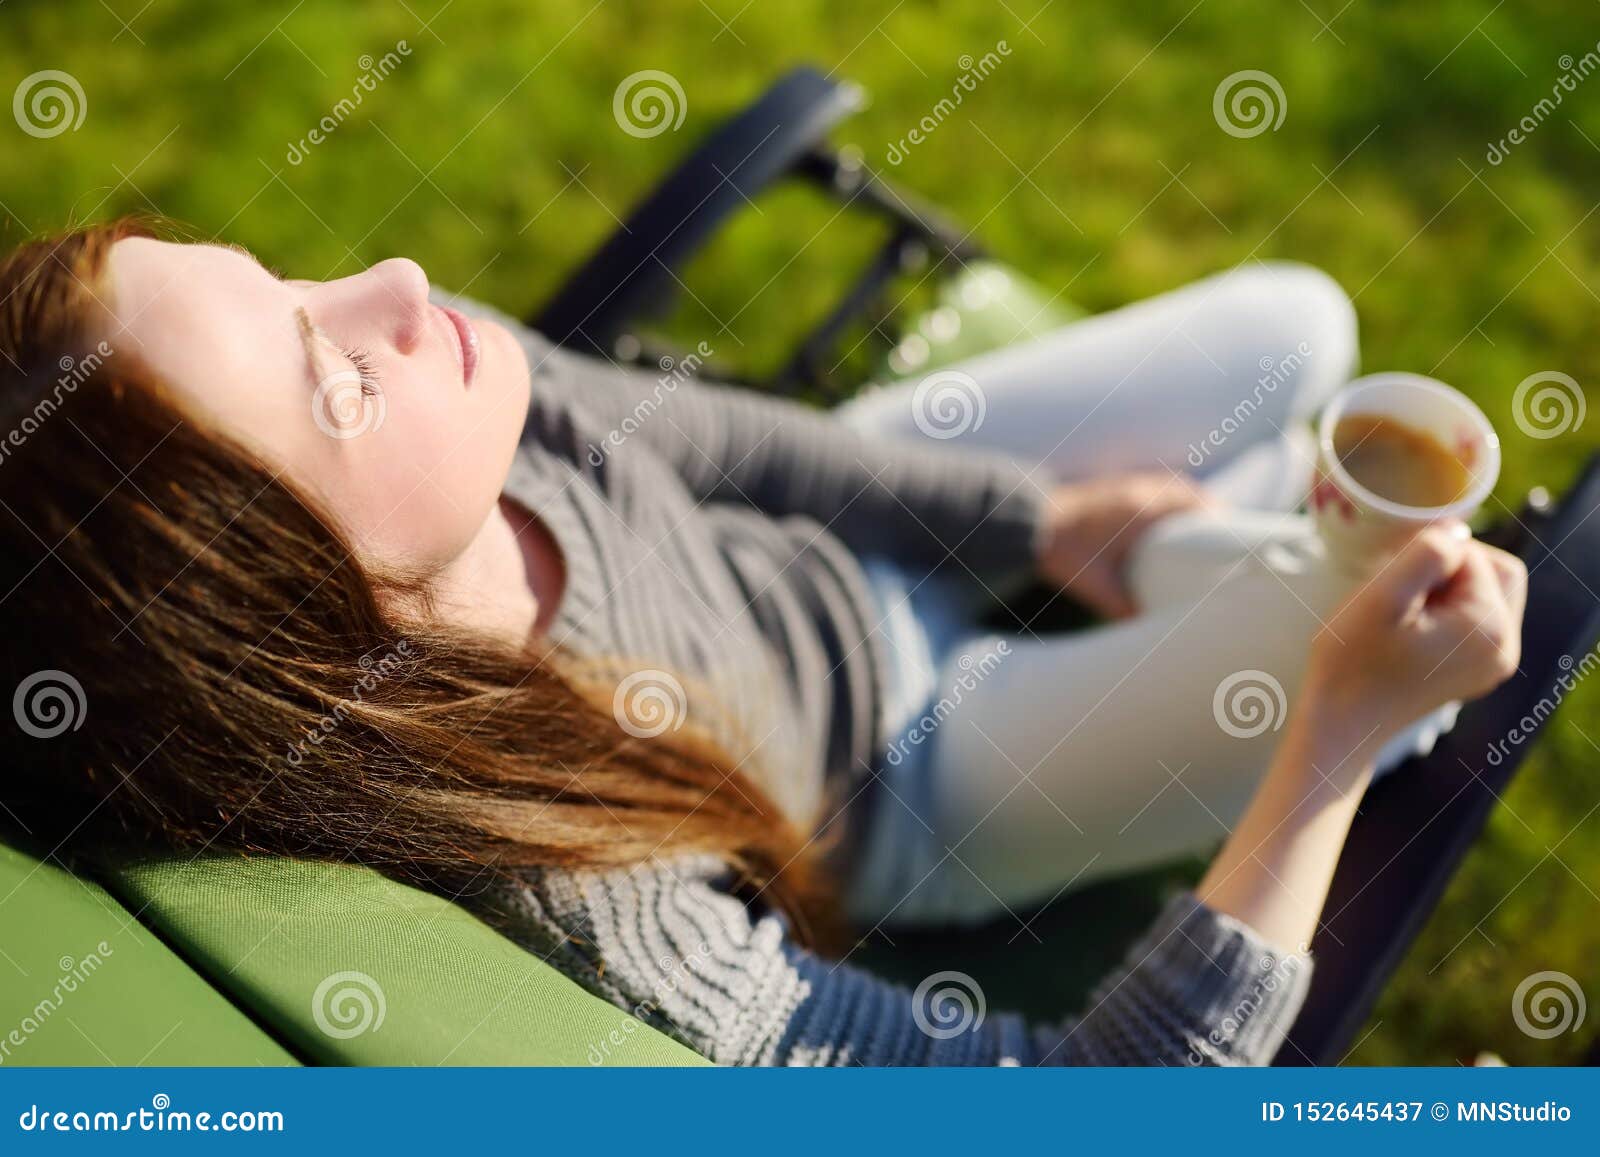 woman-relaxing-closed-eyes-cup-coffee-lounge-chair-sunny-day-outdoors-daydreaming-152645437.jpg